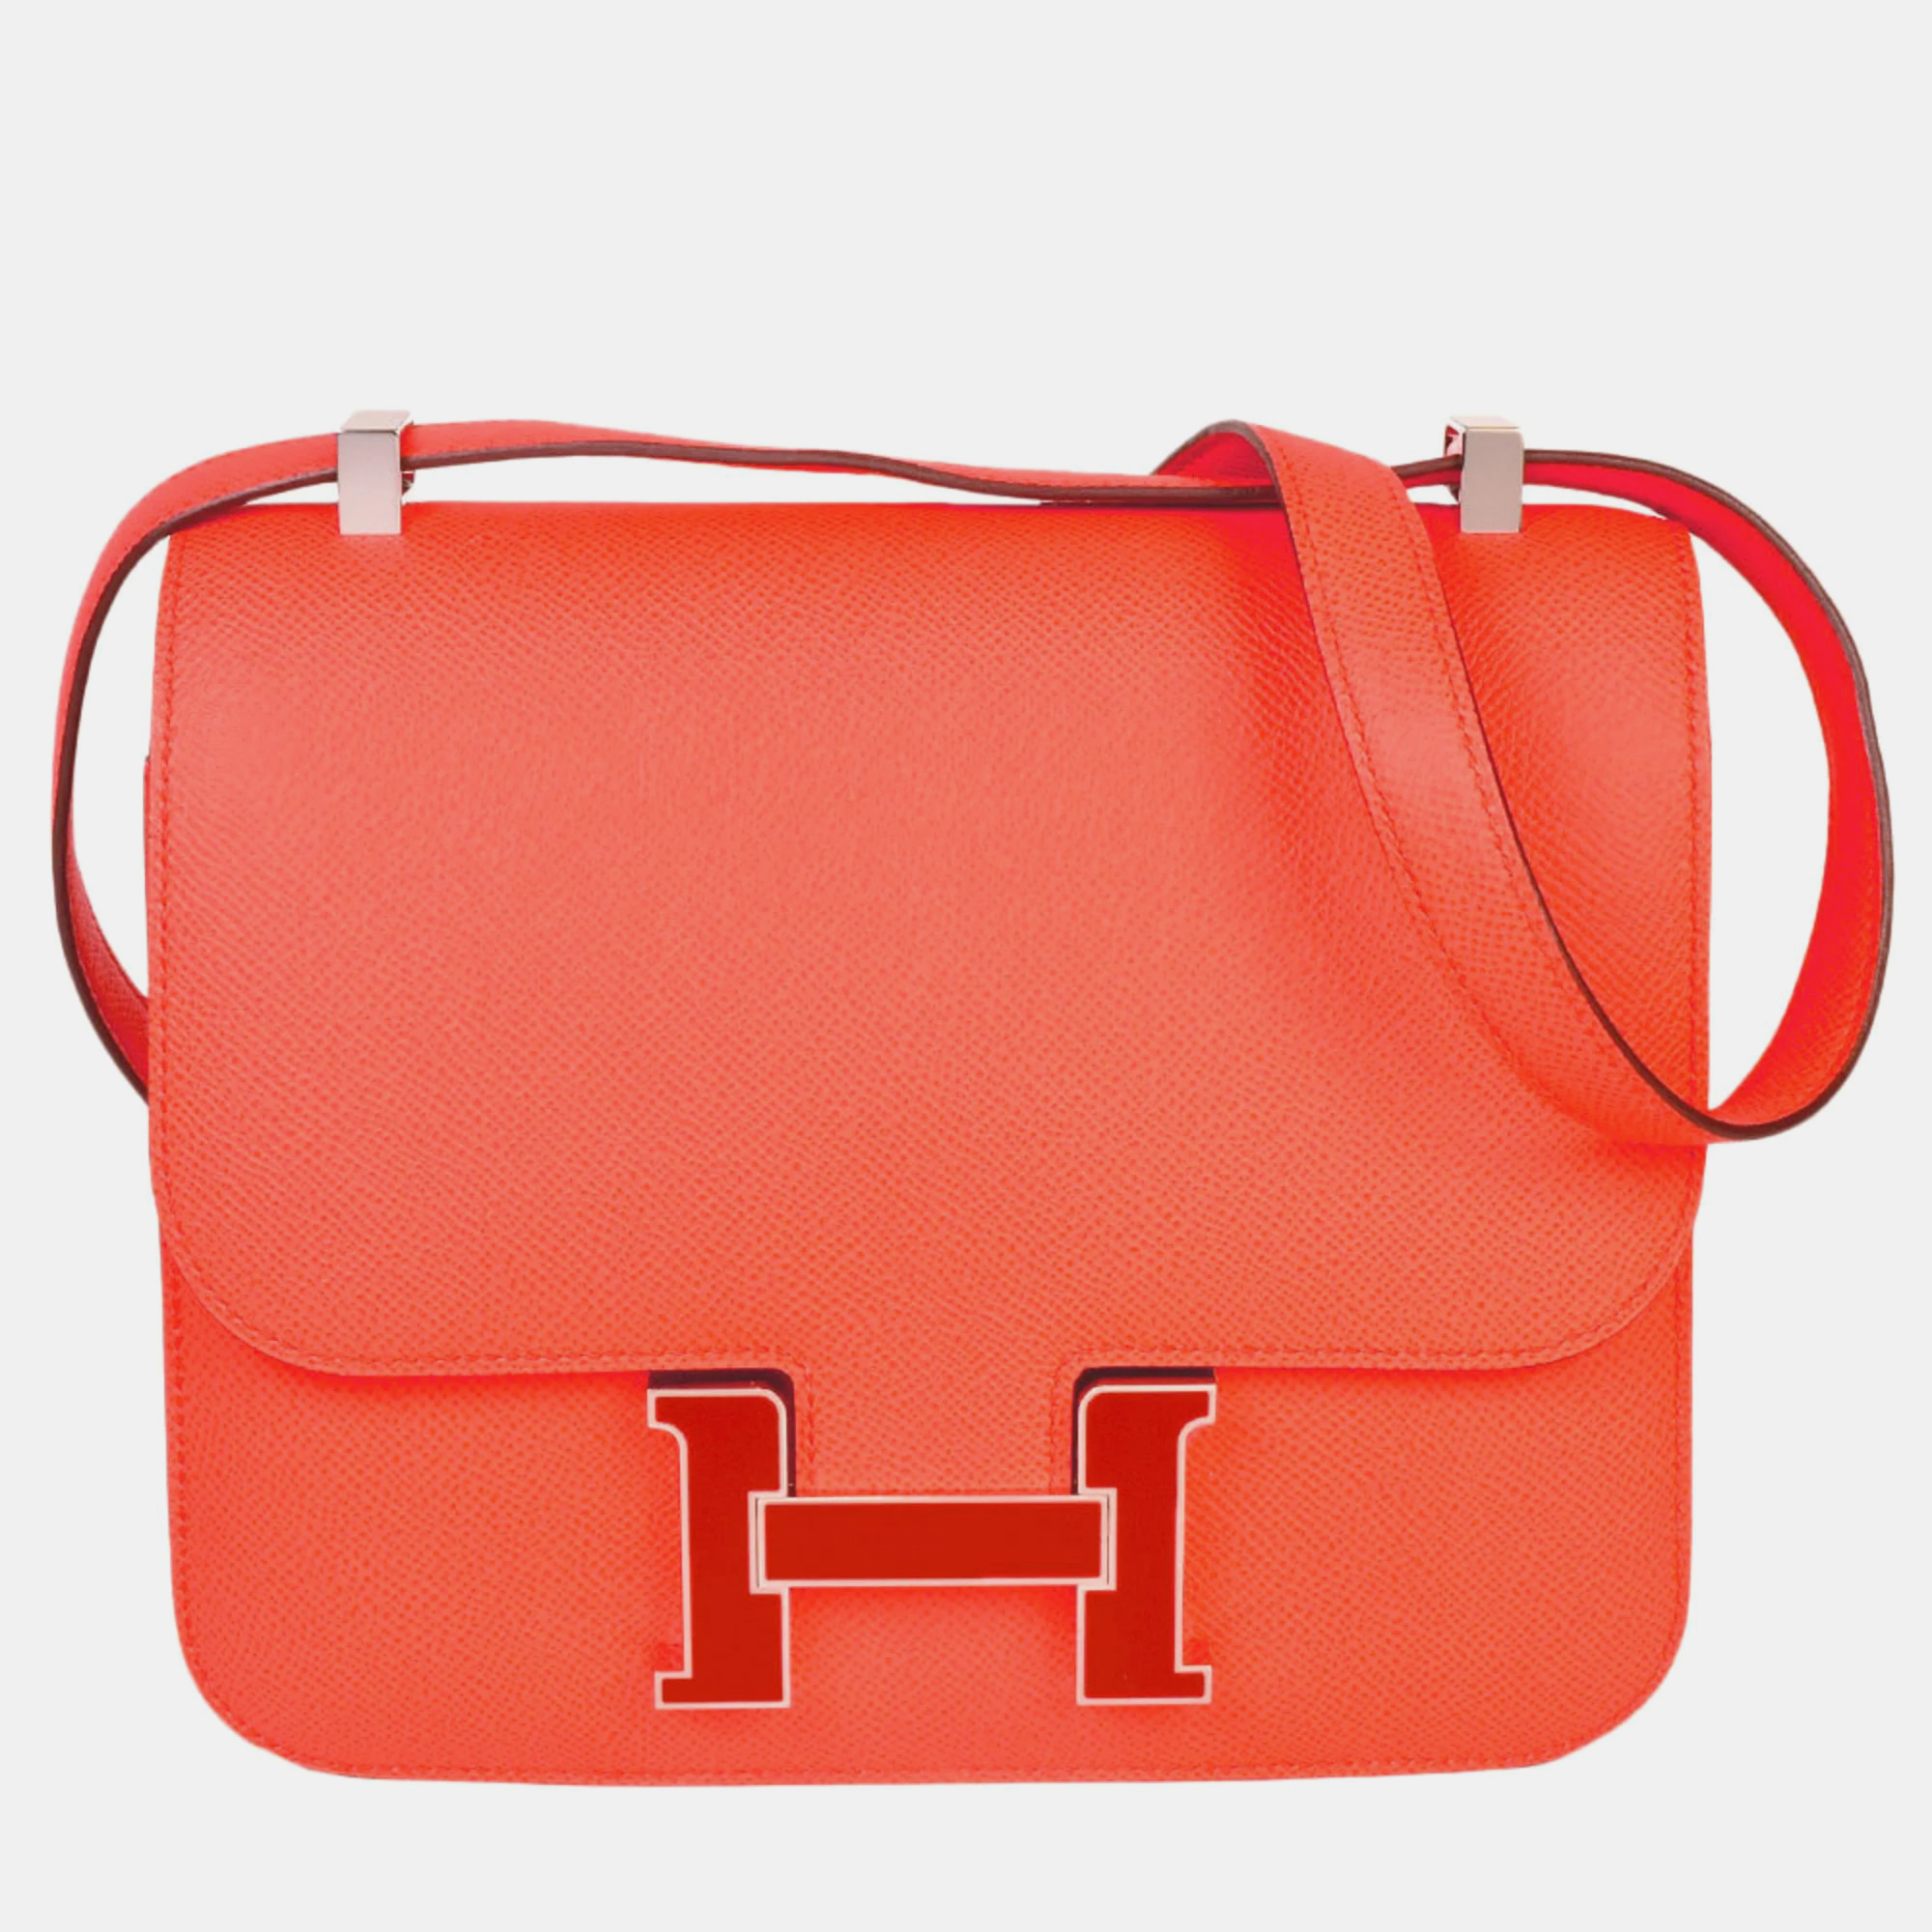 Elevate your elegance with an Hermès shoulder bag a symbol of luxury and prestige. Meticulously crafted from the finest materials it seamlessly blends timeless style with unparalleled craftsmanship.